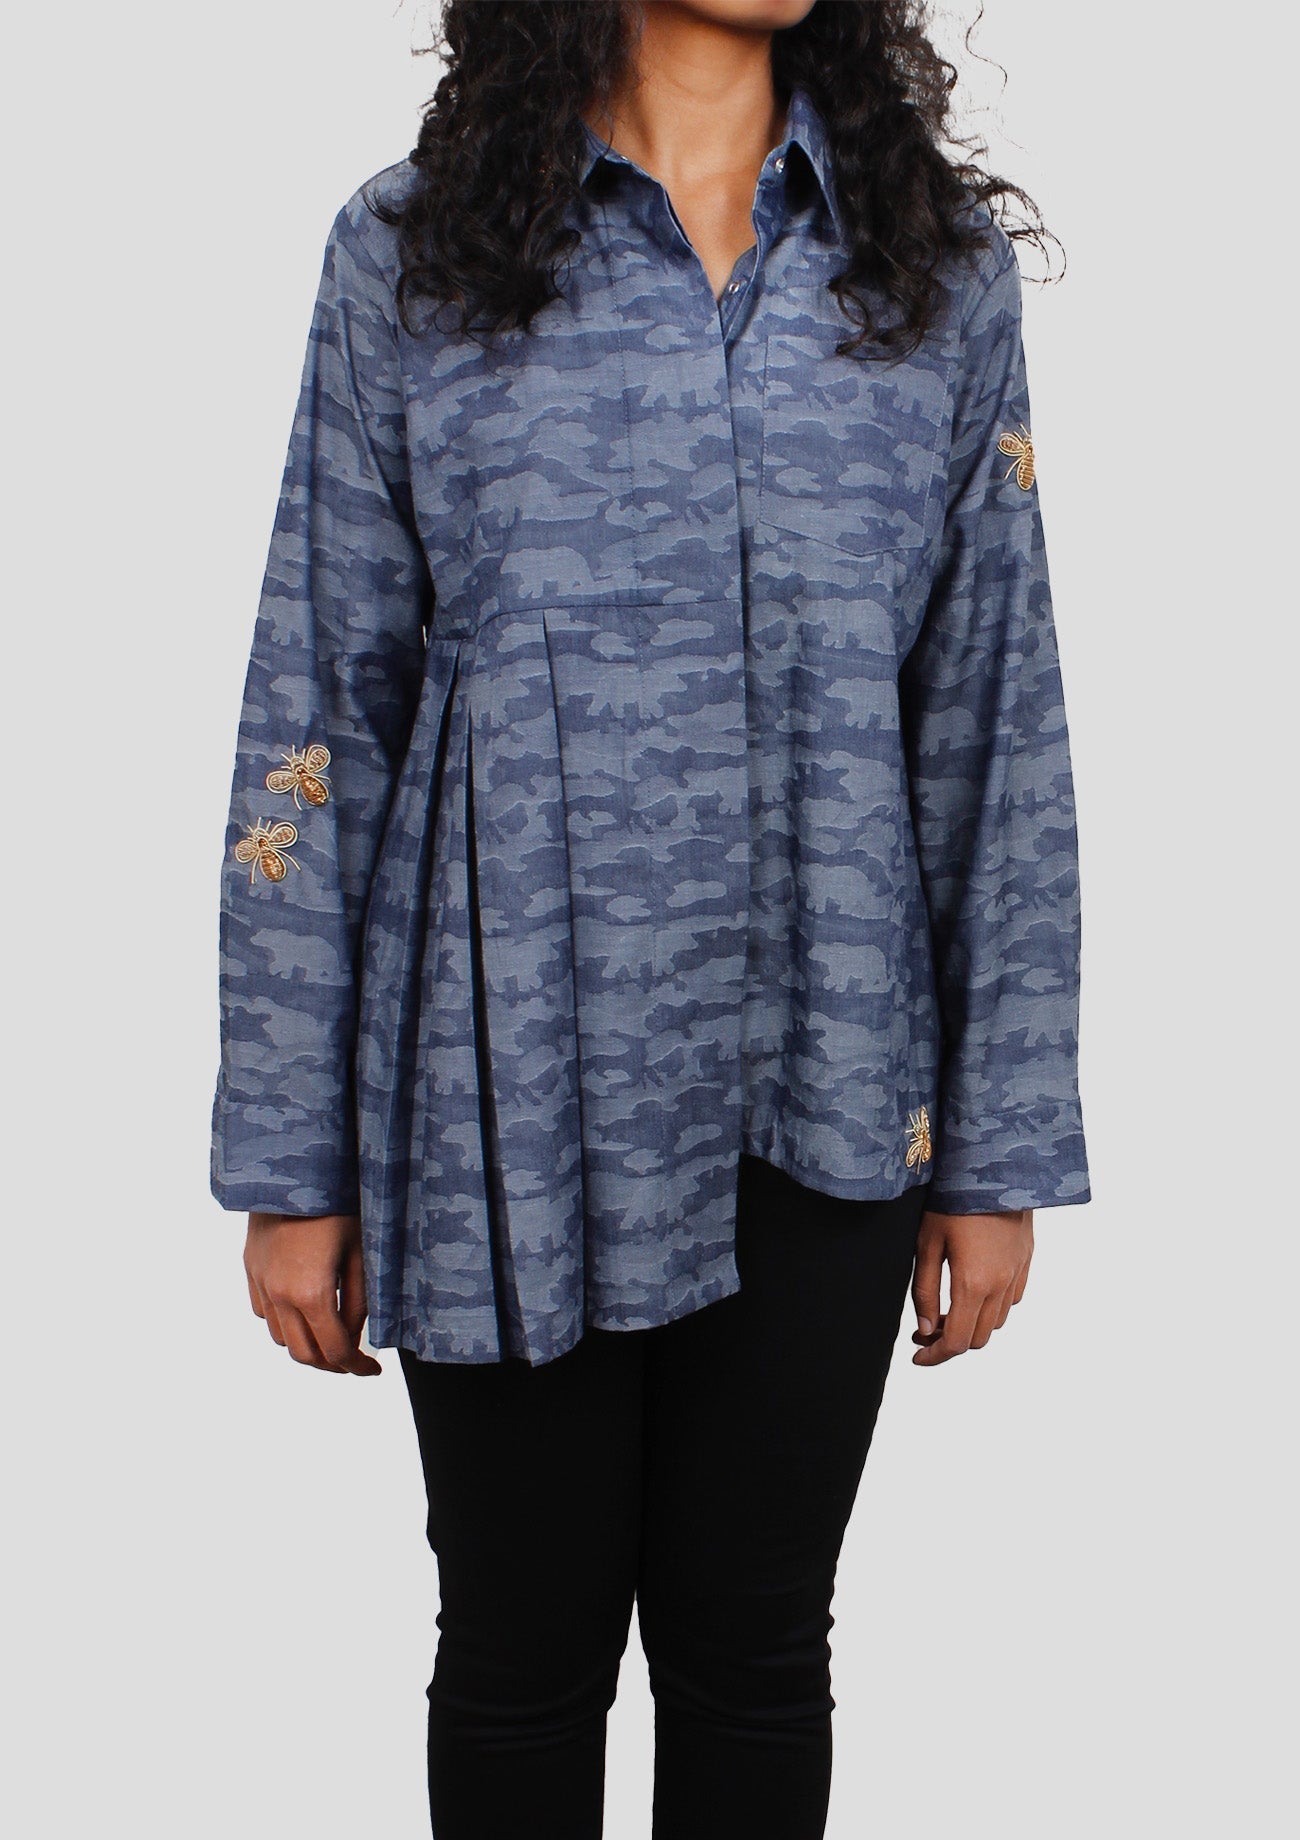 Denim Camouflage Weave asymmetrical Shirt With Embroidered Bugs